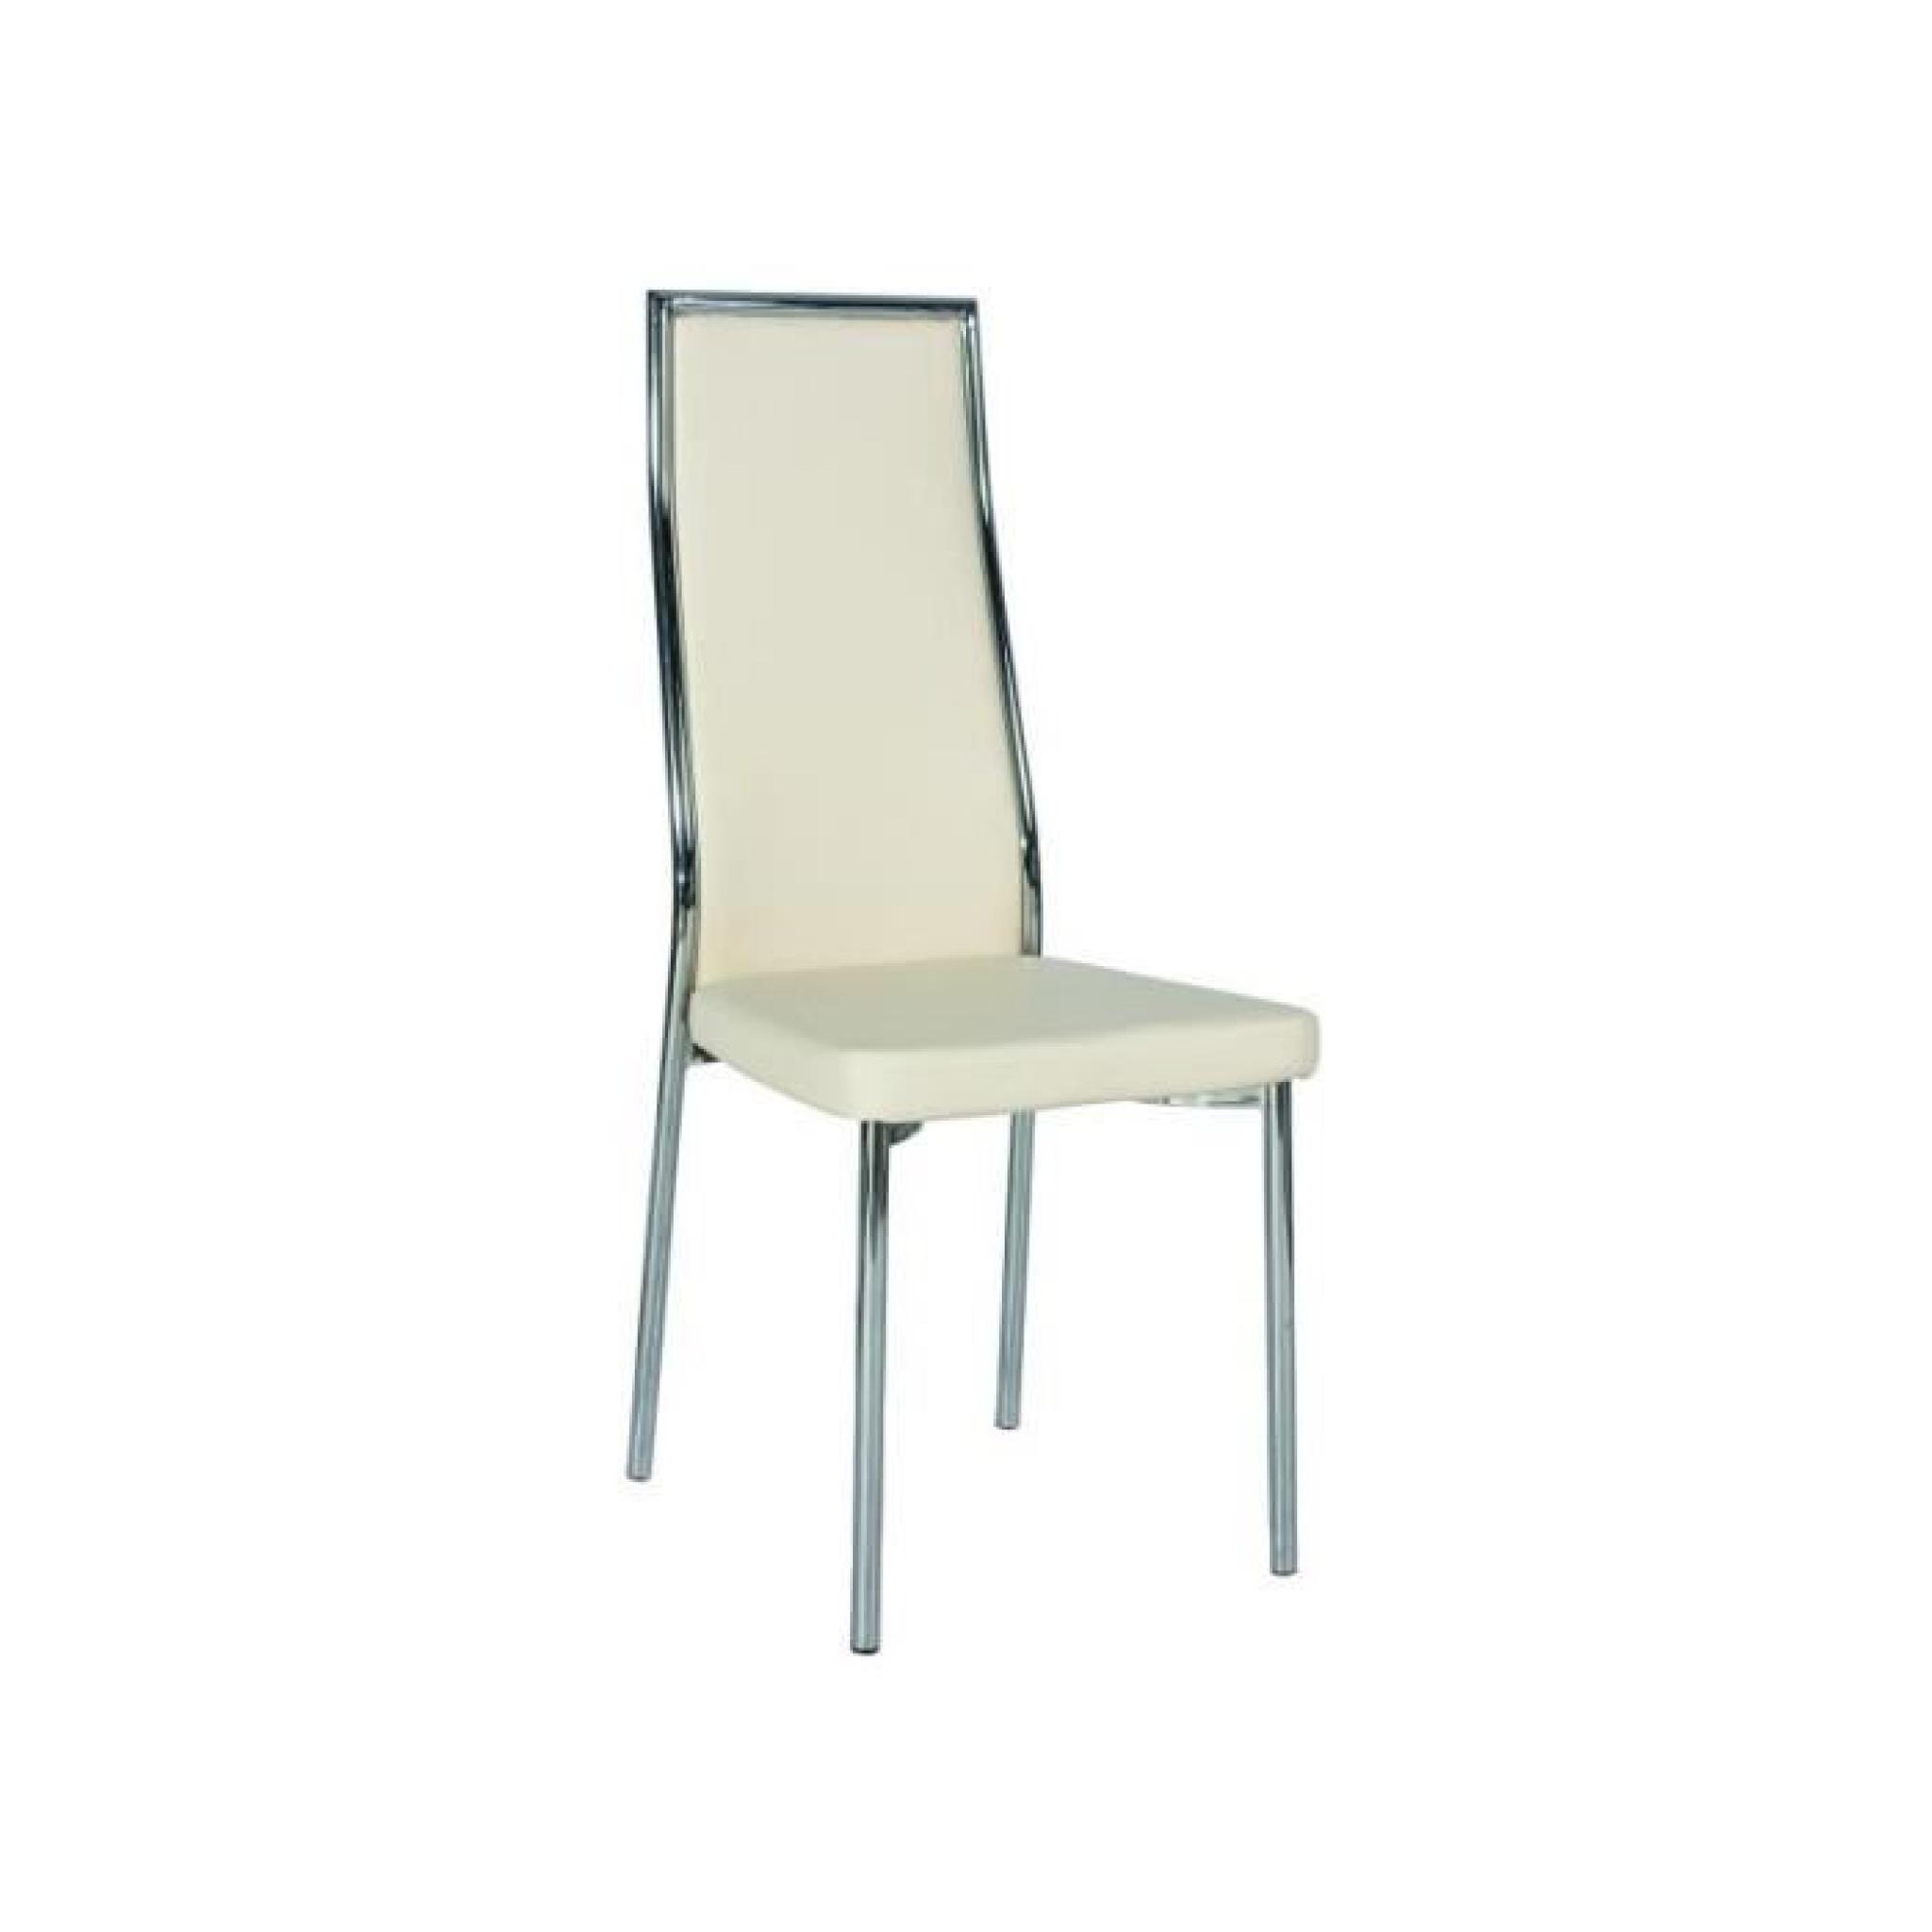 JUSThome H-758 Chaise Crème 102 x 43 x 48